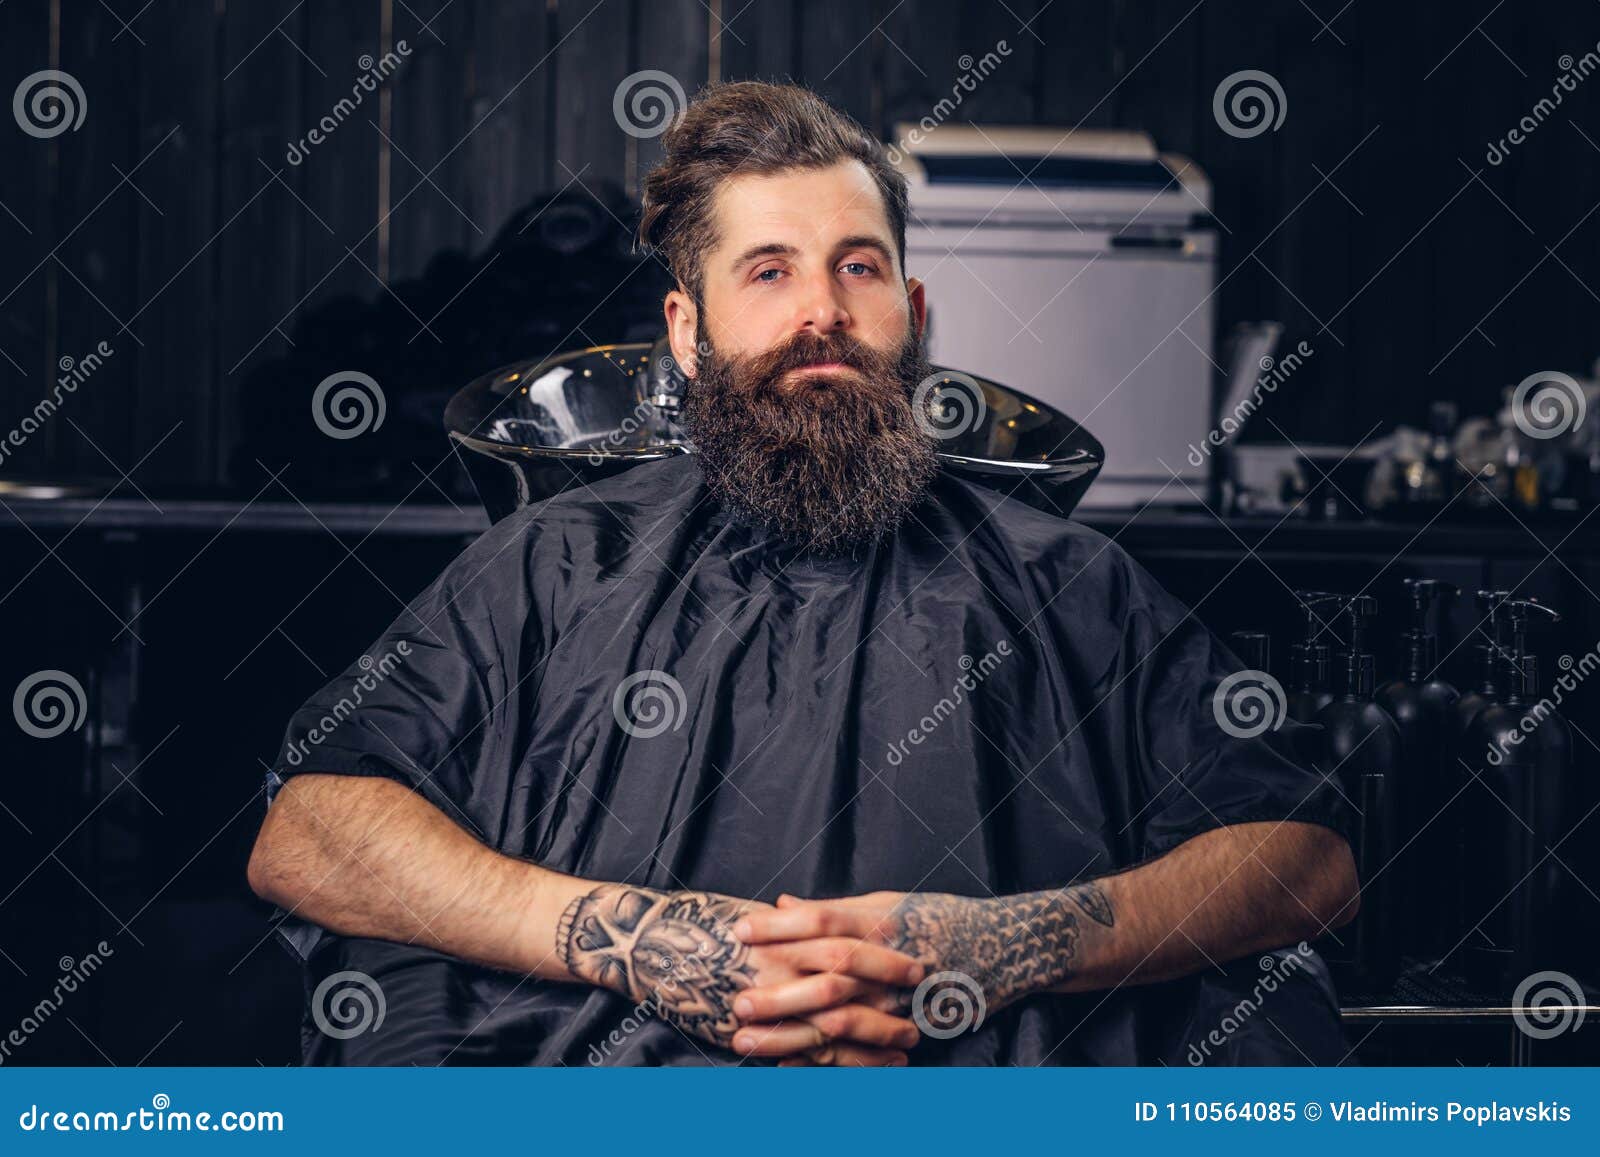 Handsome Bearded Man in the Barbershop. Stock Image - Image of beard ...